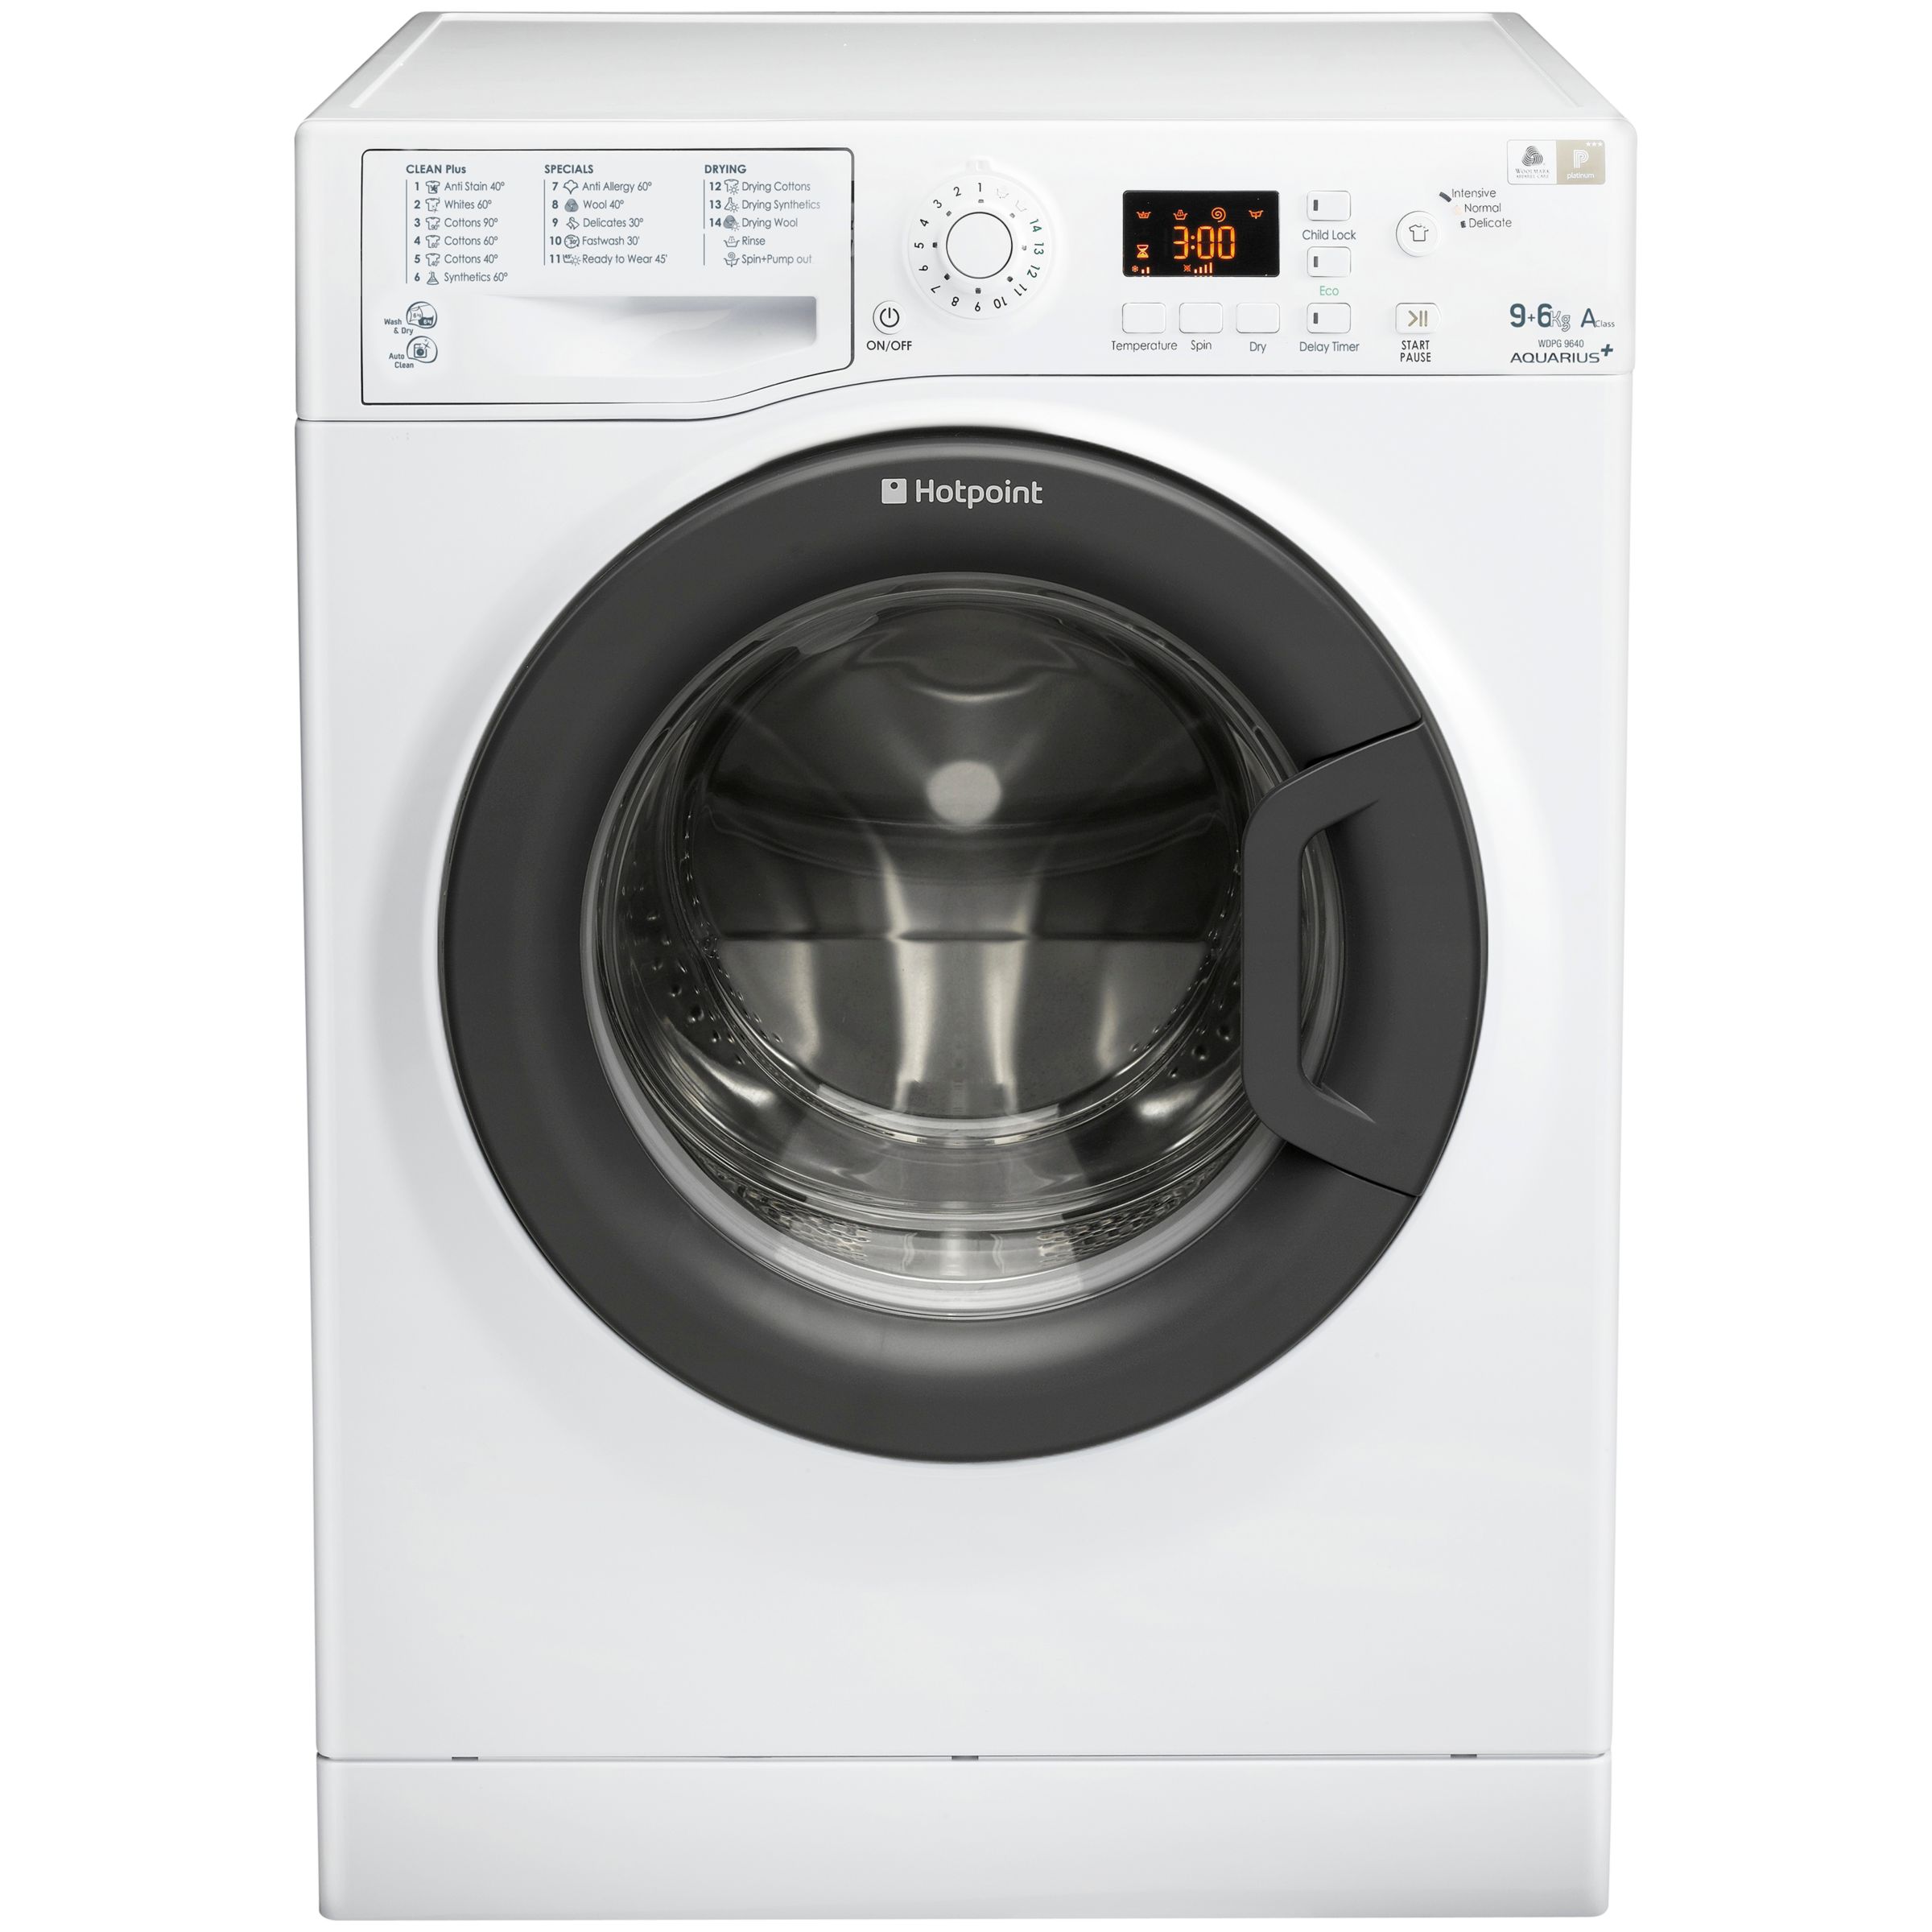 Hotpoint WDPG9640BC Signature Washer Dryer, 9kg Wash/6kg Dry Load, A Energy Rating, 1400rpm Spin, White